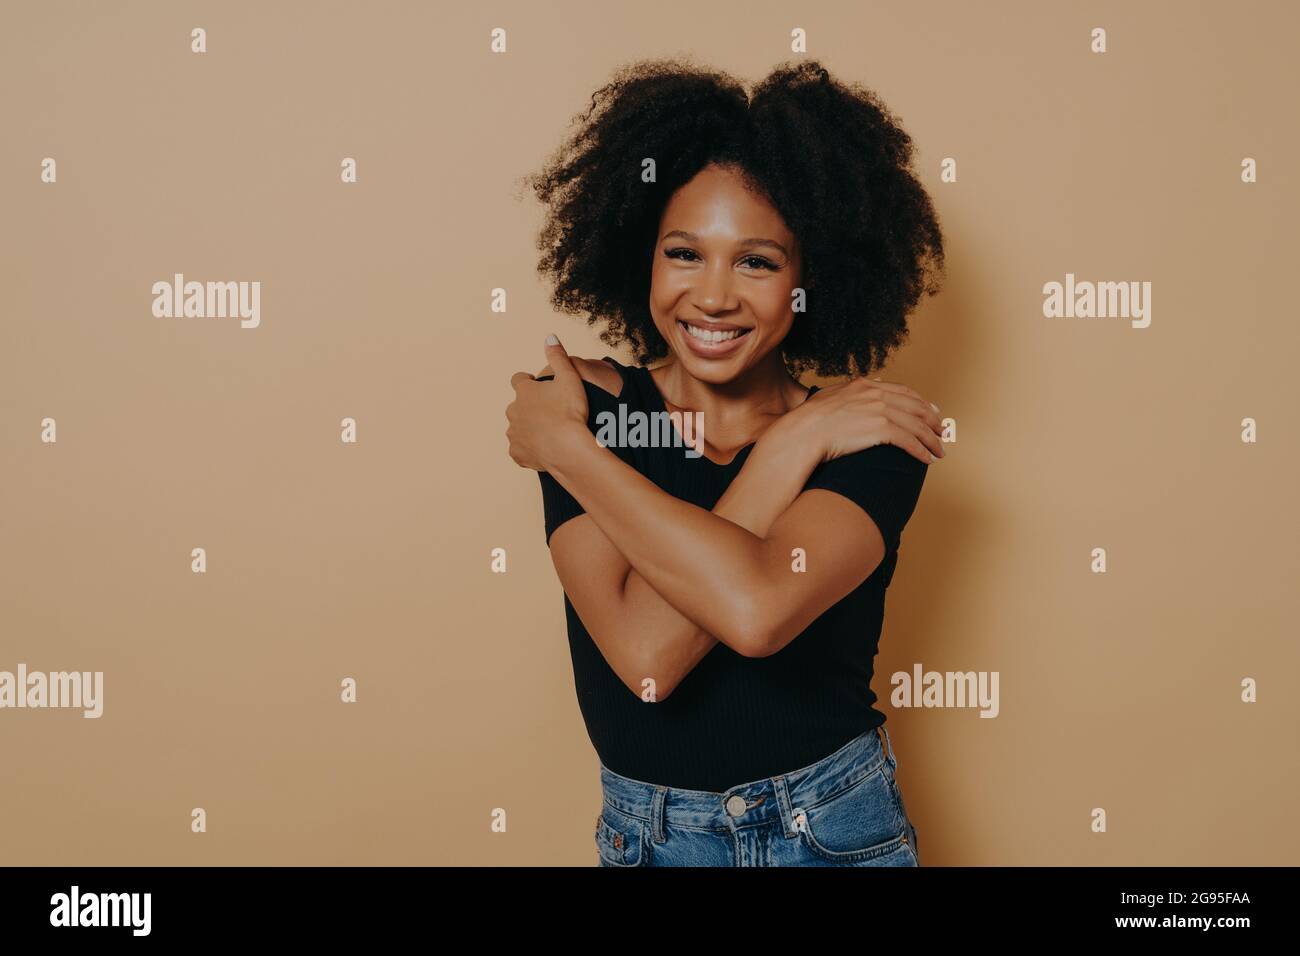 Image of beautiful pleased young dark skinned female with voluminous afro hairstyle Stock Photo